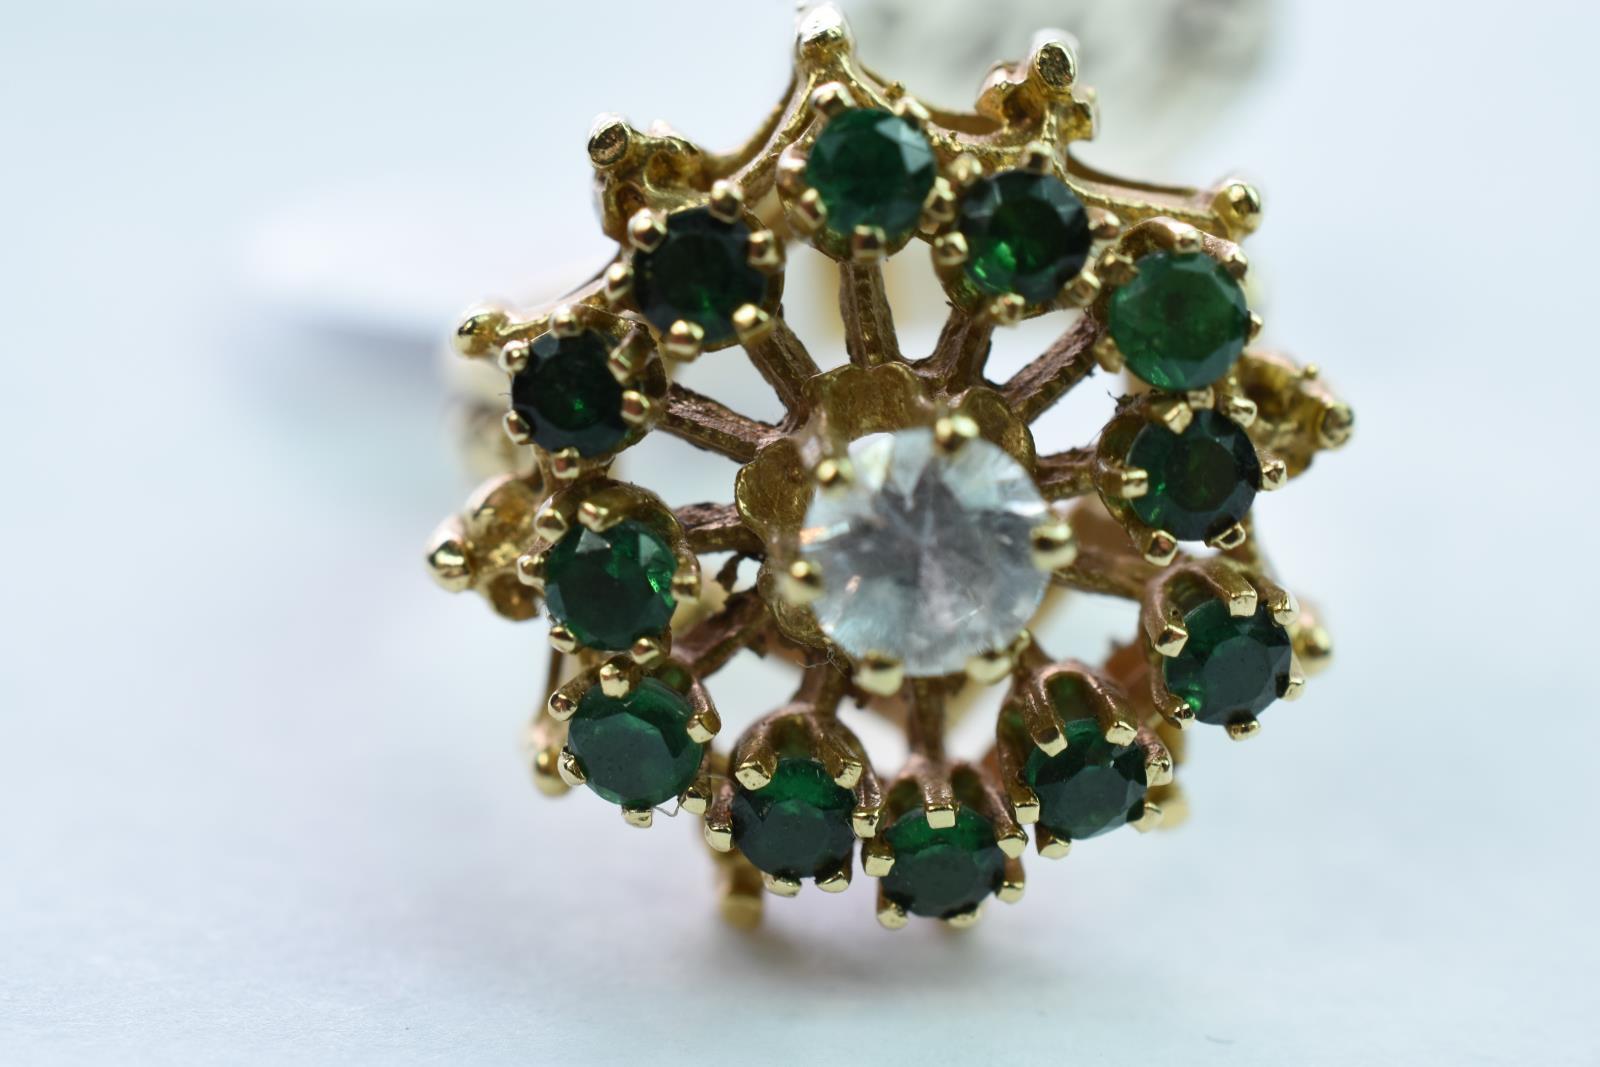 14 KT GOLD DIAMOND EMERALD RING 5.3 GTW, $395.00 RETAIL VALUE ,SIZE 5 1/4